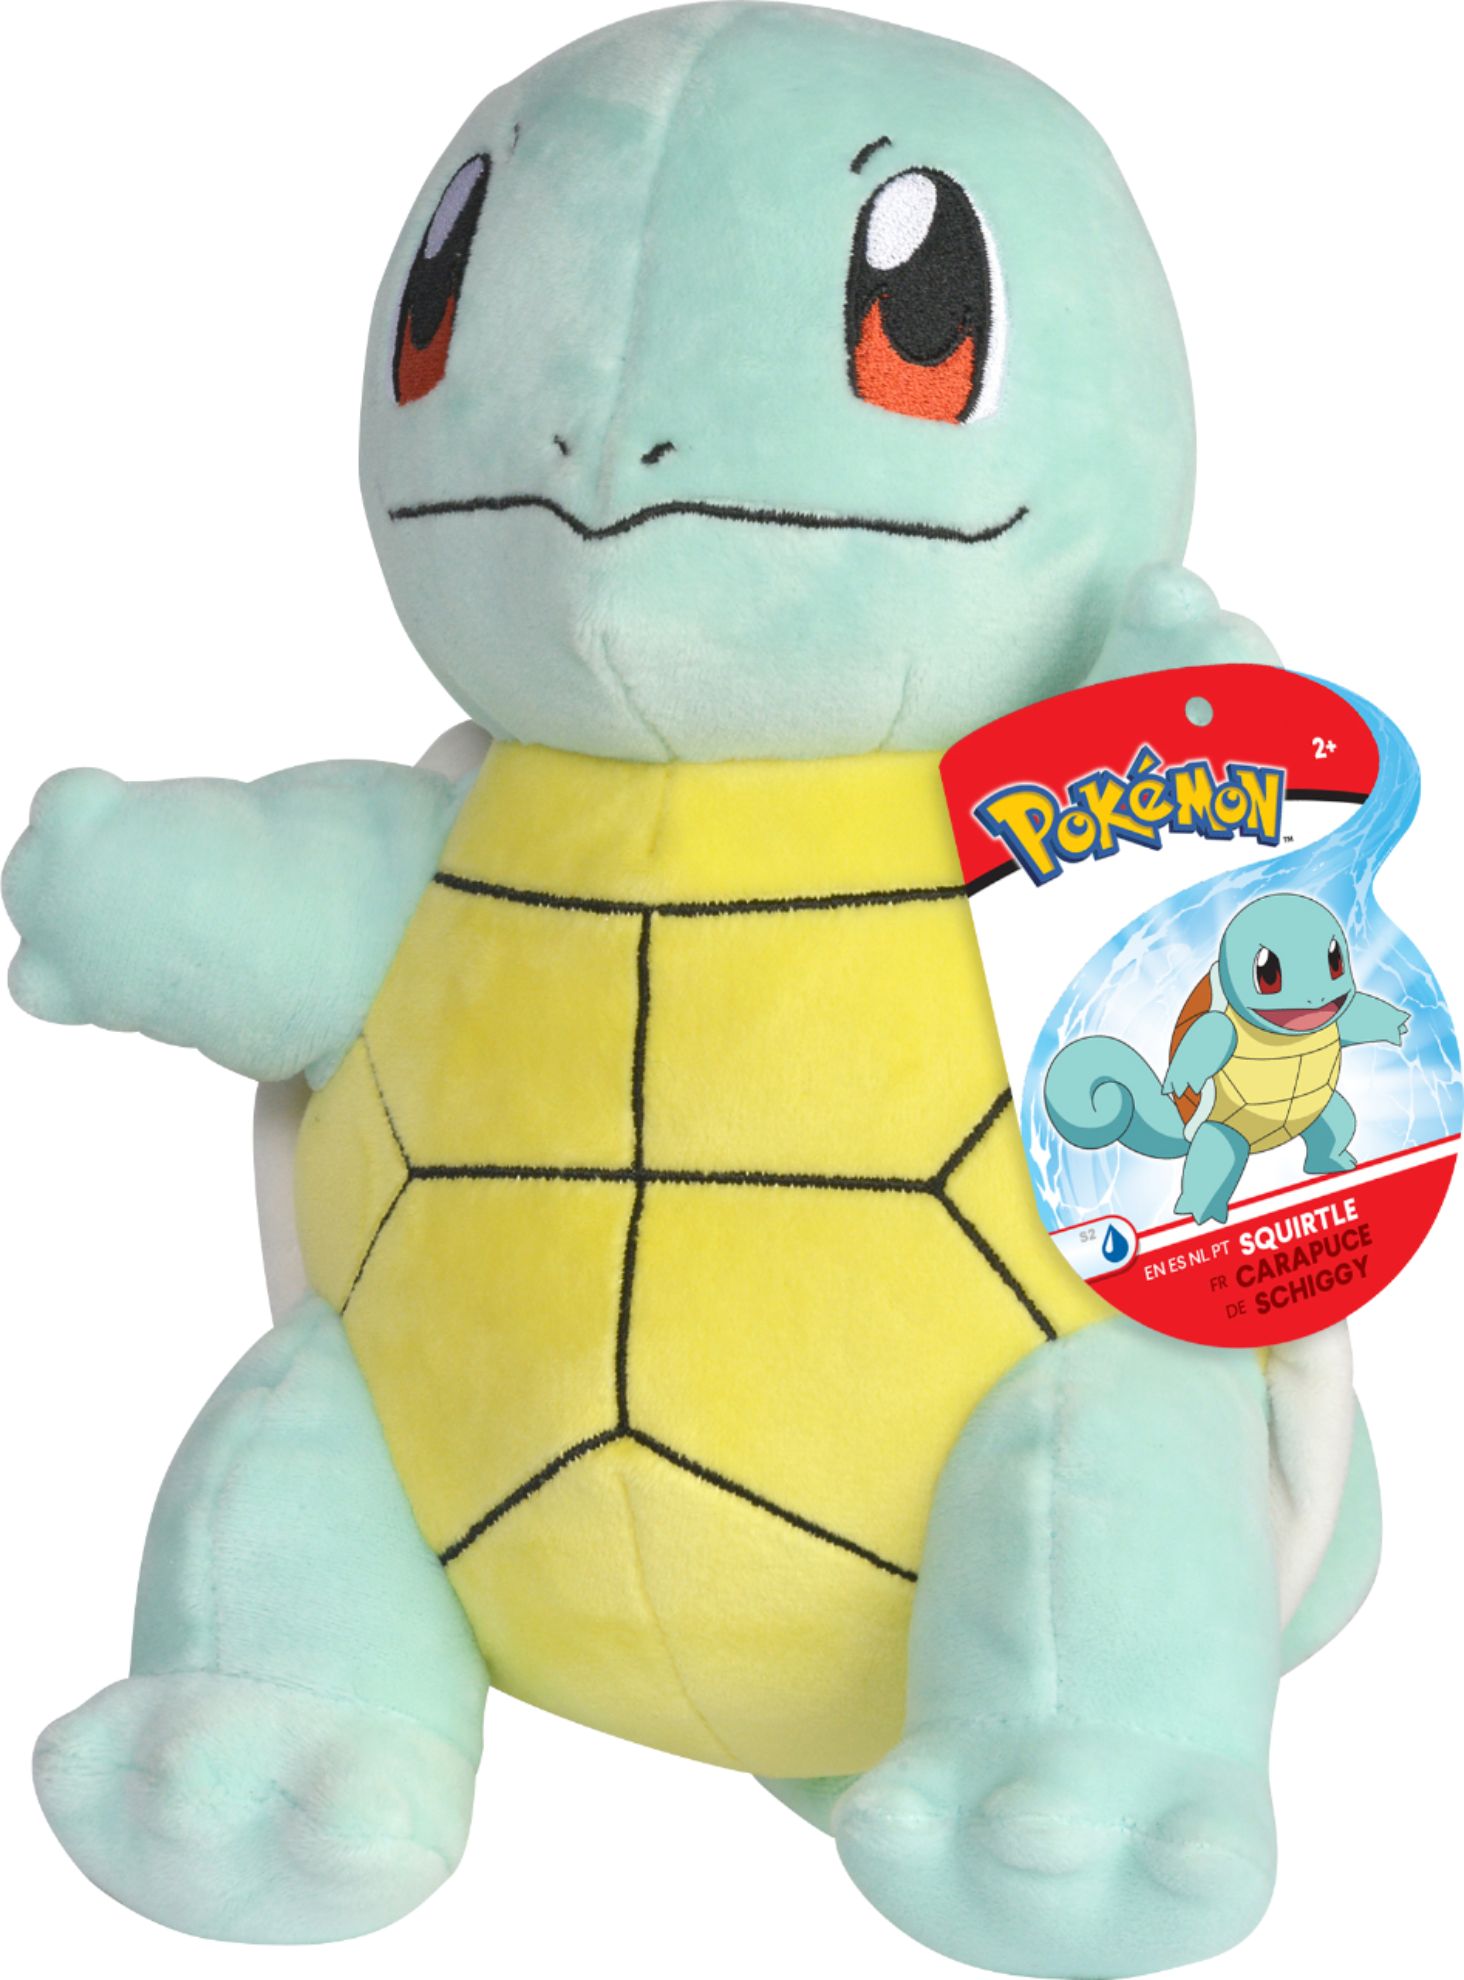 8" Squirtle # 007 Pokemon Plush Dolls Toys Authentic Official TOMY New With Tags 